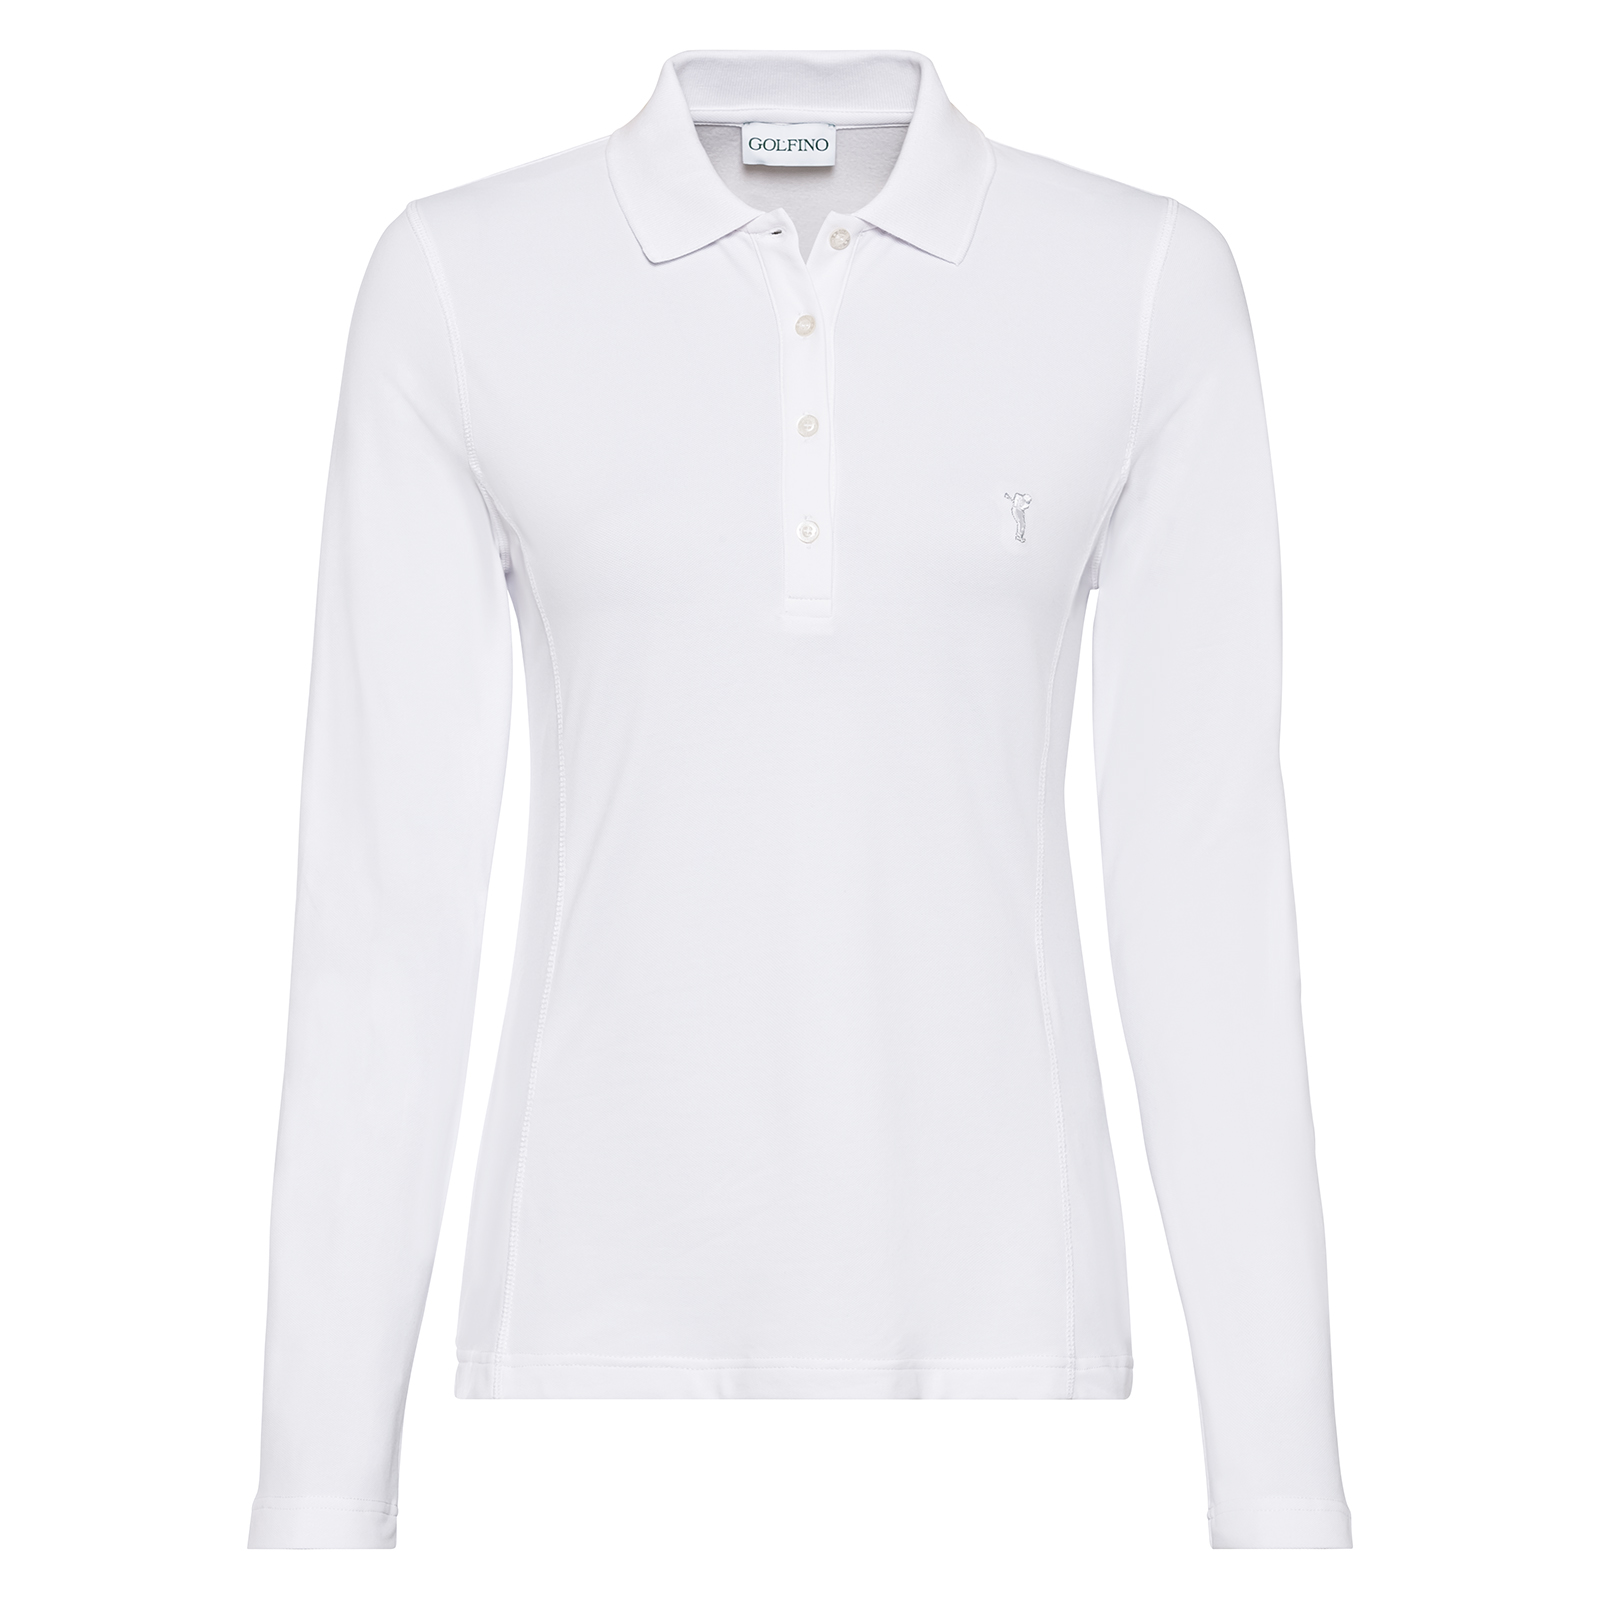 Ladies' long-sleeved polo shirt with ultraviolet protection (UPF)